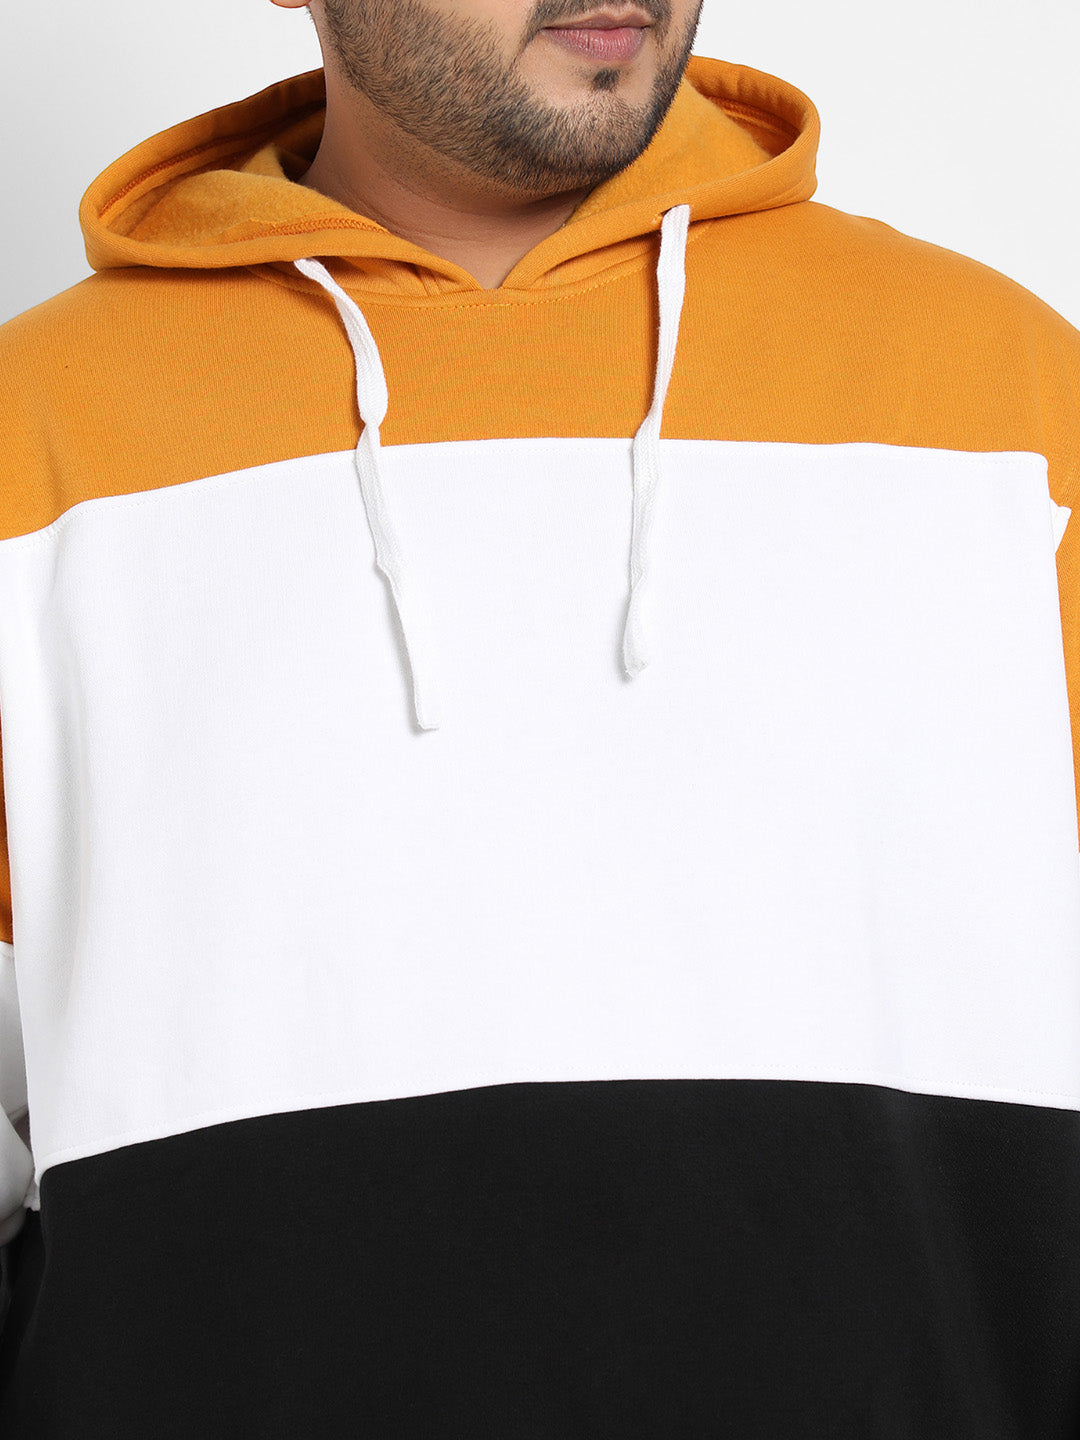 Plus Size Men's Multicolour Contrast Panel Hoodie With Ribbed Hem